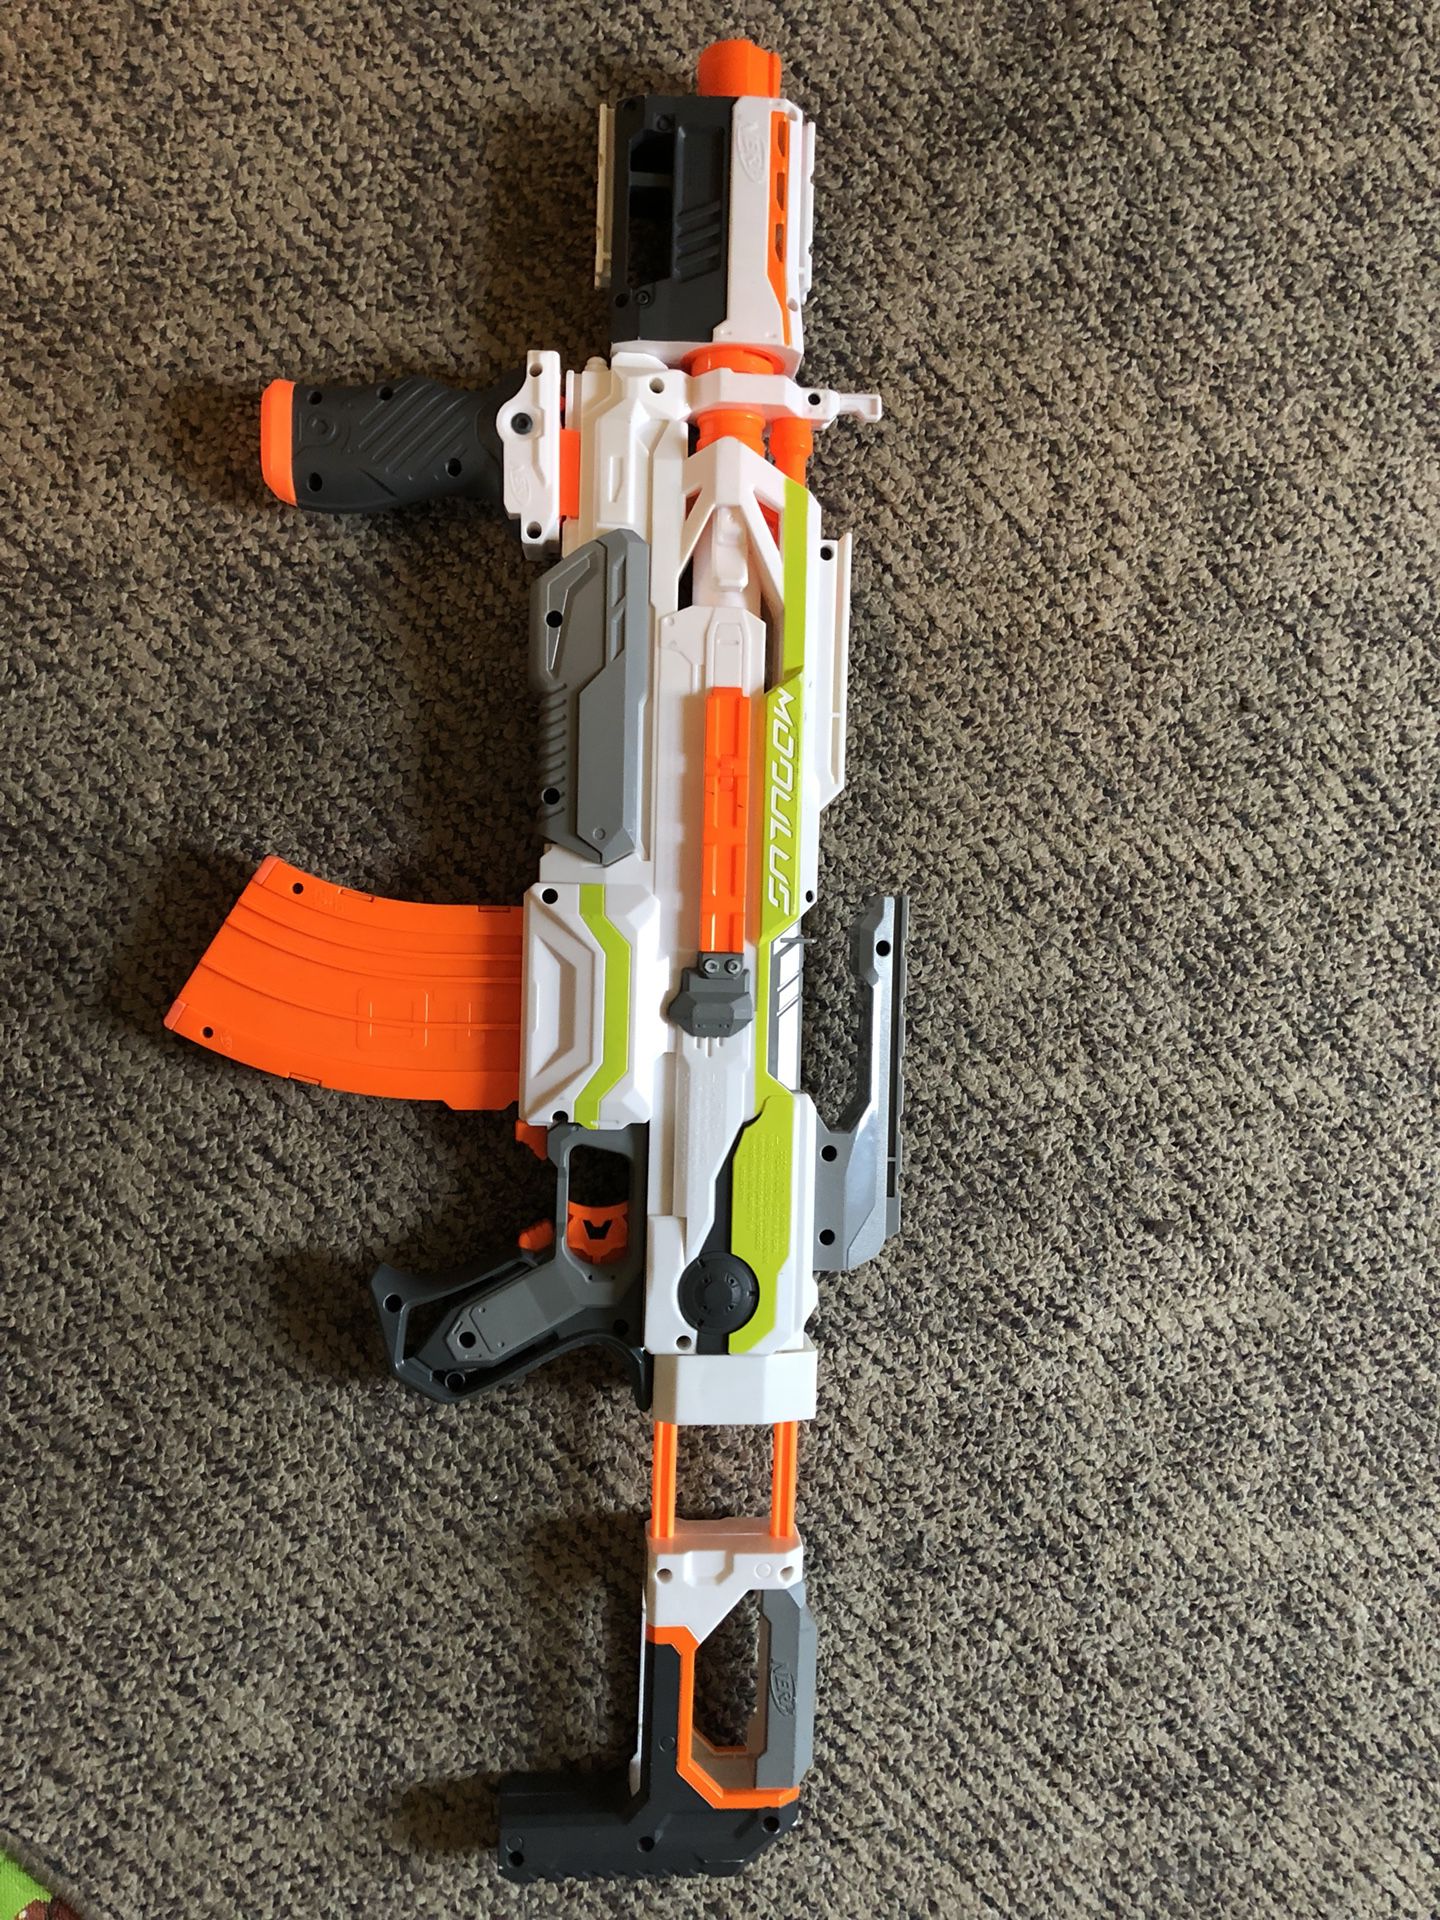 Nerf gun with extra